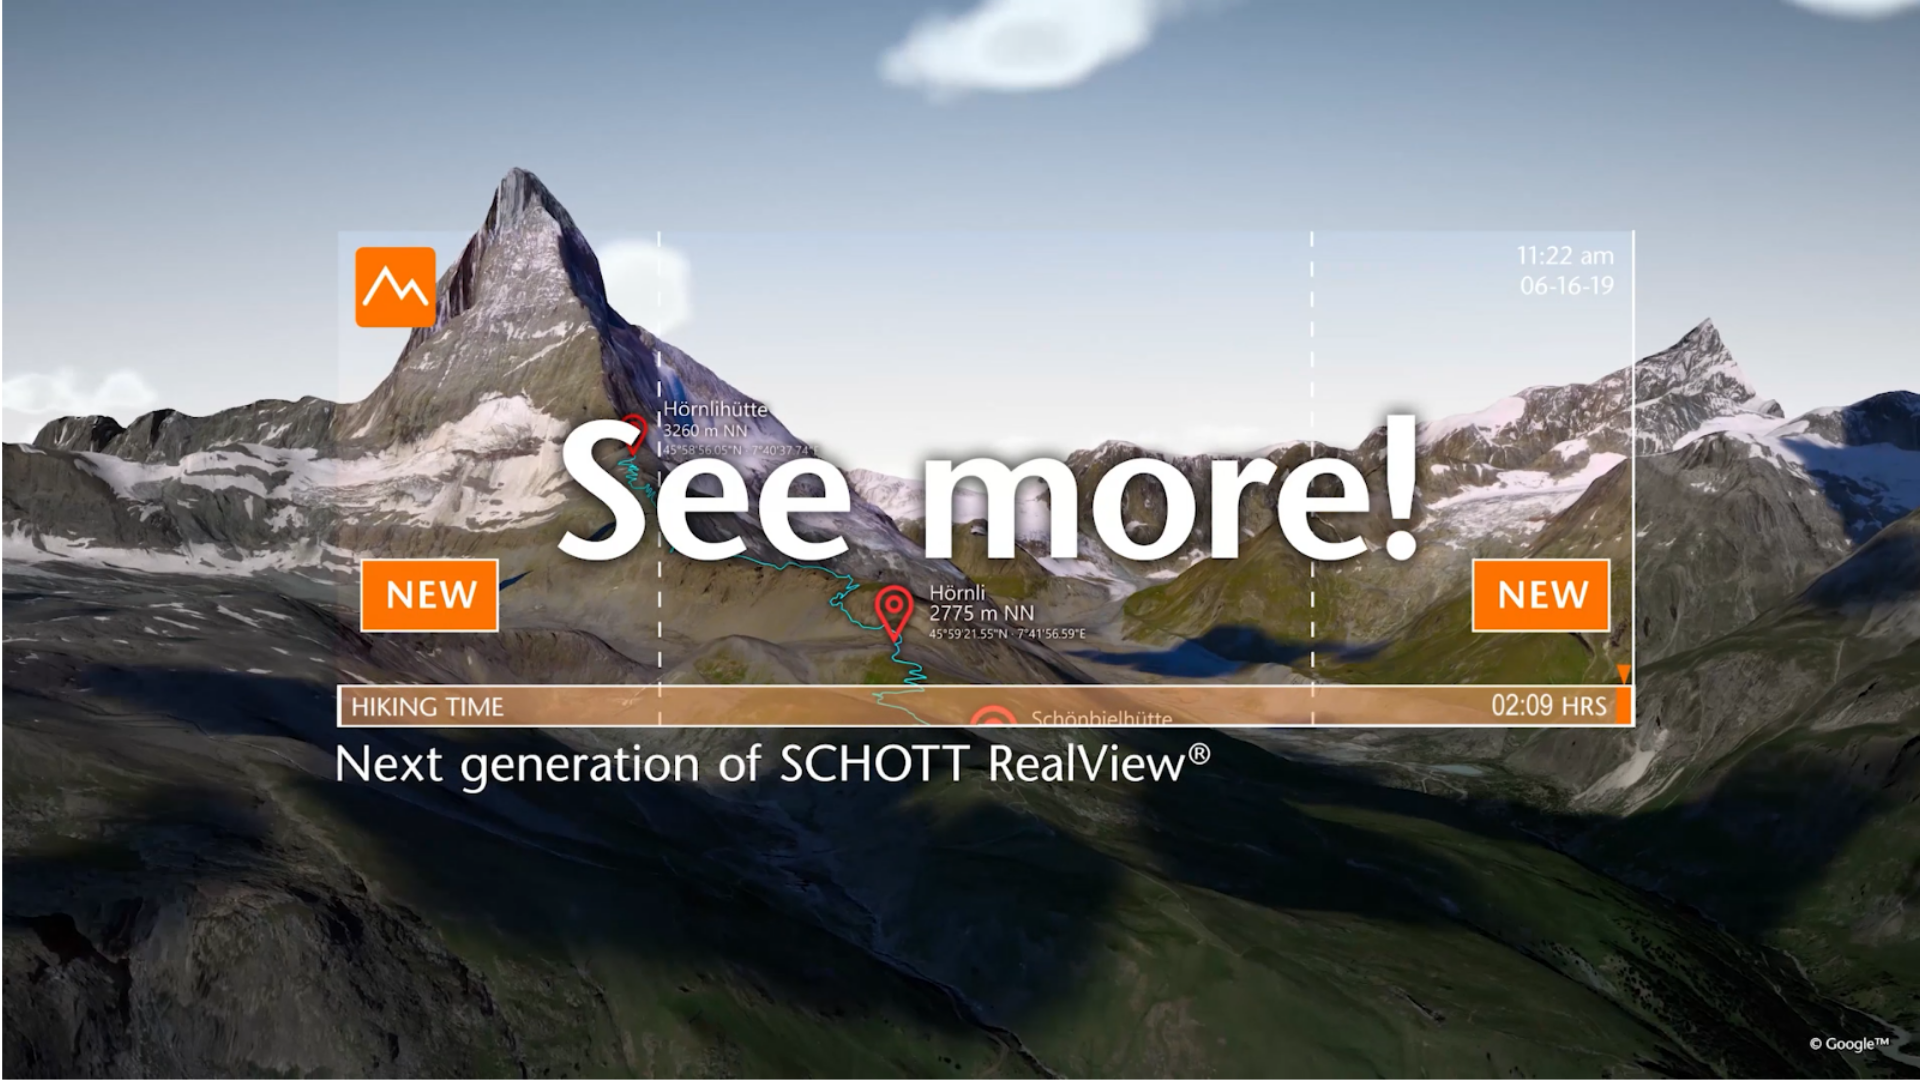 Click to discover how SCHOTT RealView® allows you to discover more about the world around you